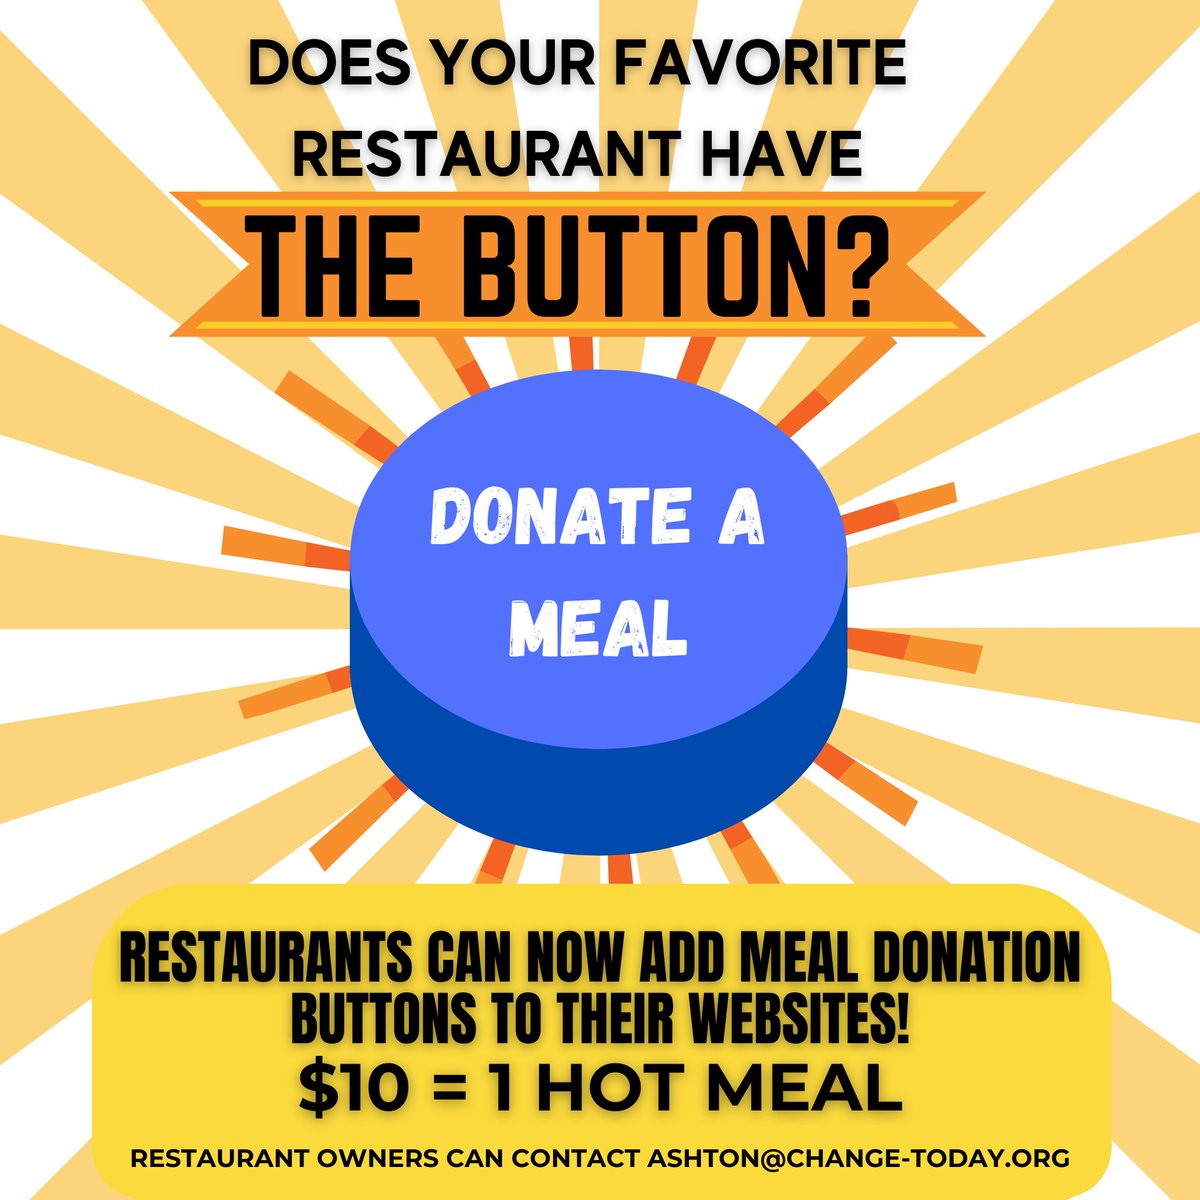 Thank you Full Stop and Green District for adding the button! Does your favorite restaurant have The Button? Restaurants can collaborate with CTCT and add a meal donation button to their menu. Tag your favorite below!